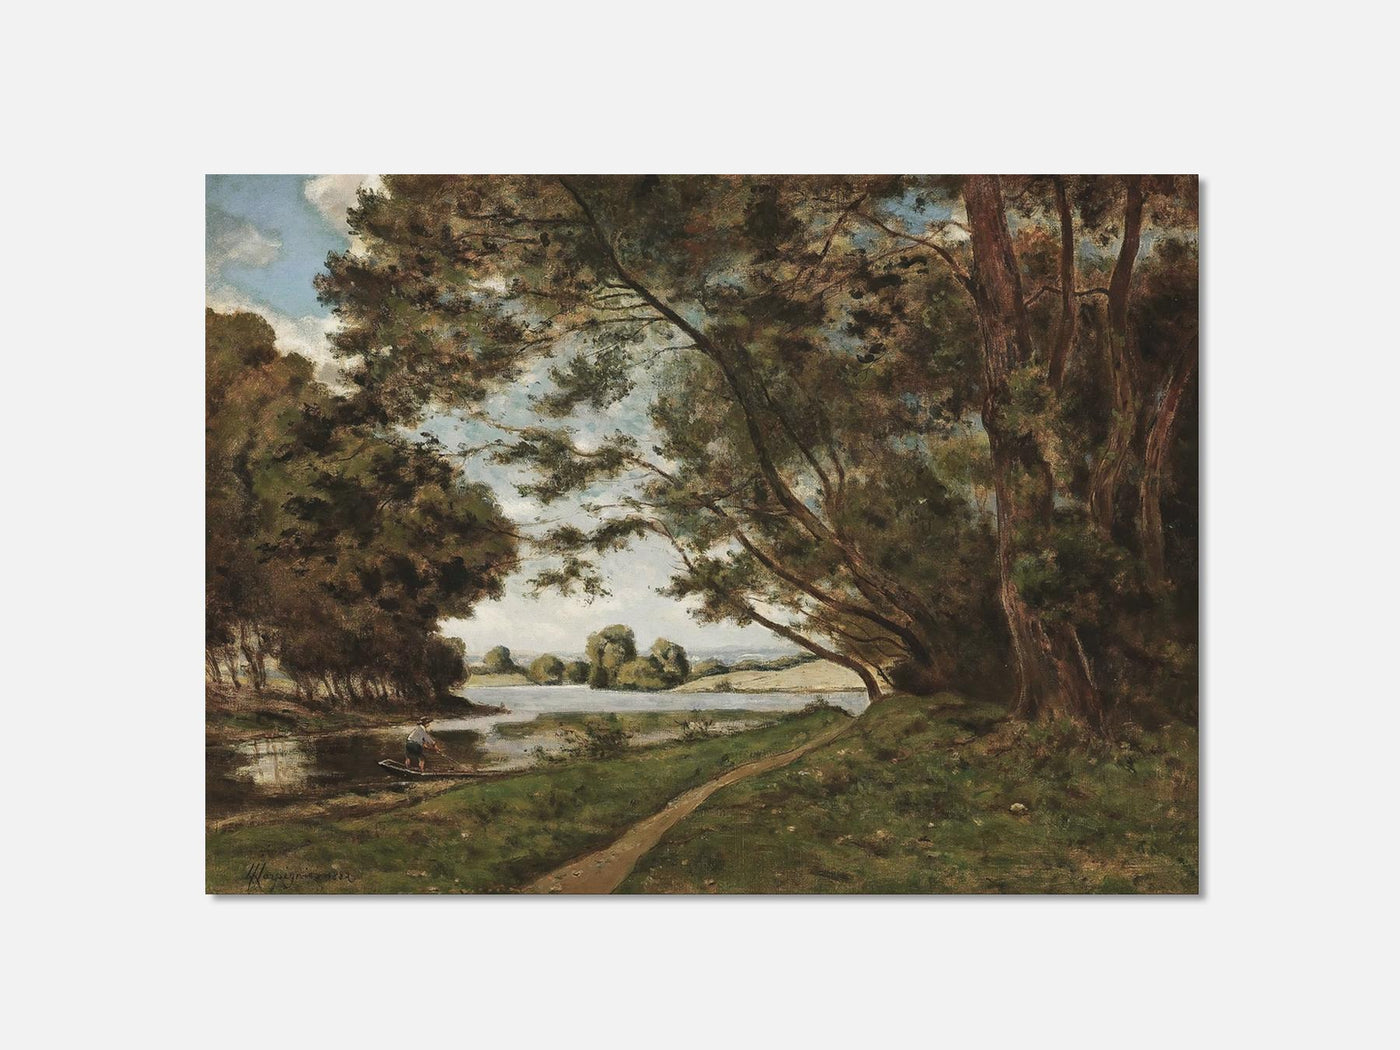 The Trail Near the River (1882)